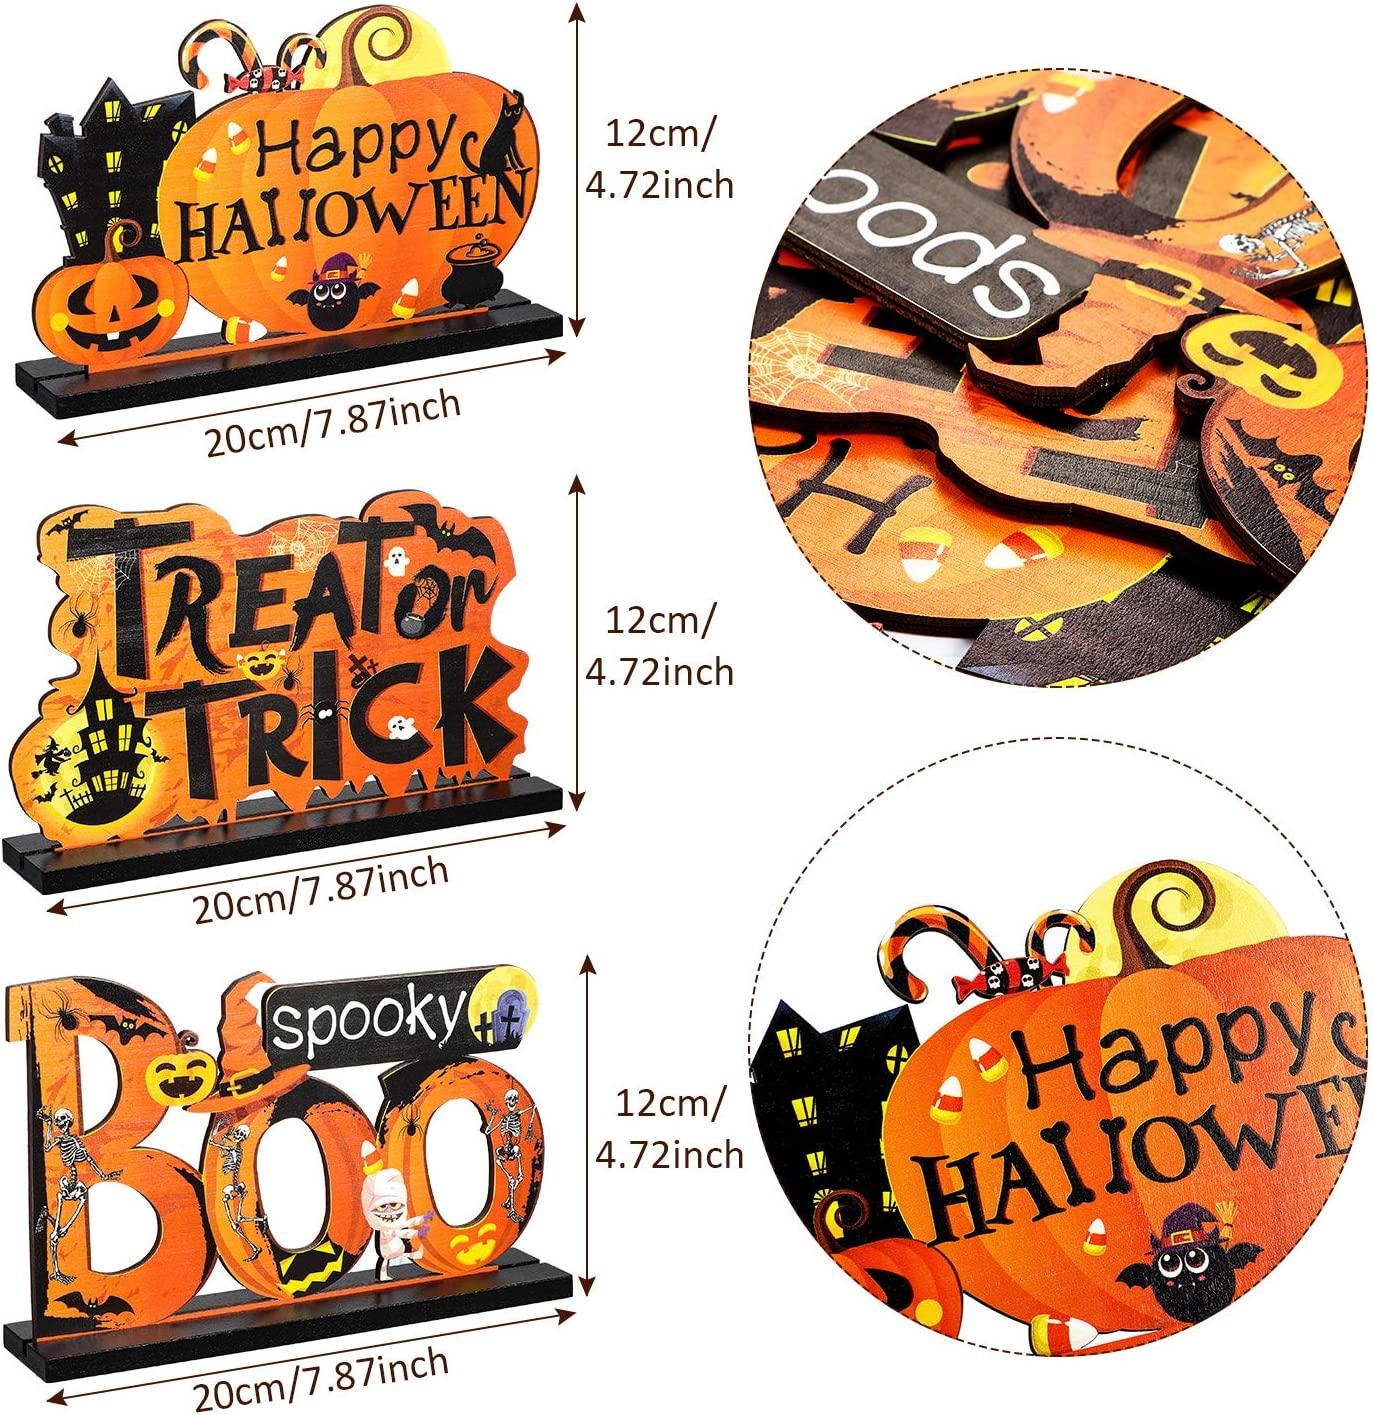 3 Happy Halloween Table Decorations, Pumpkin Table Centerpieces Boo Sign - If you say i do